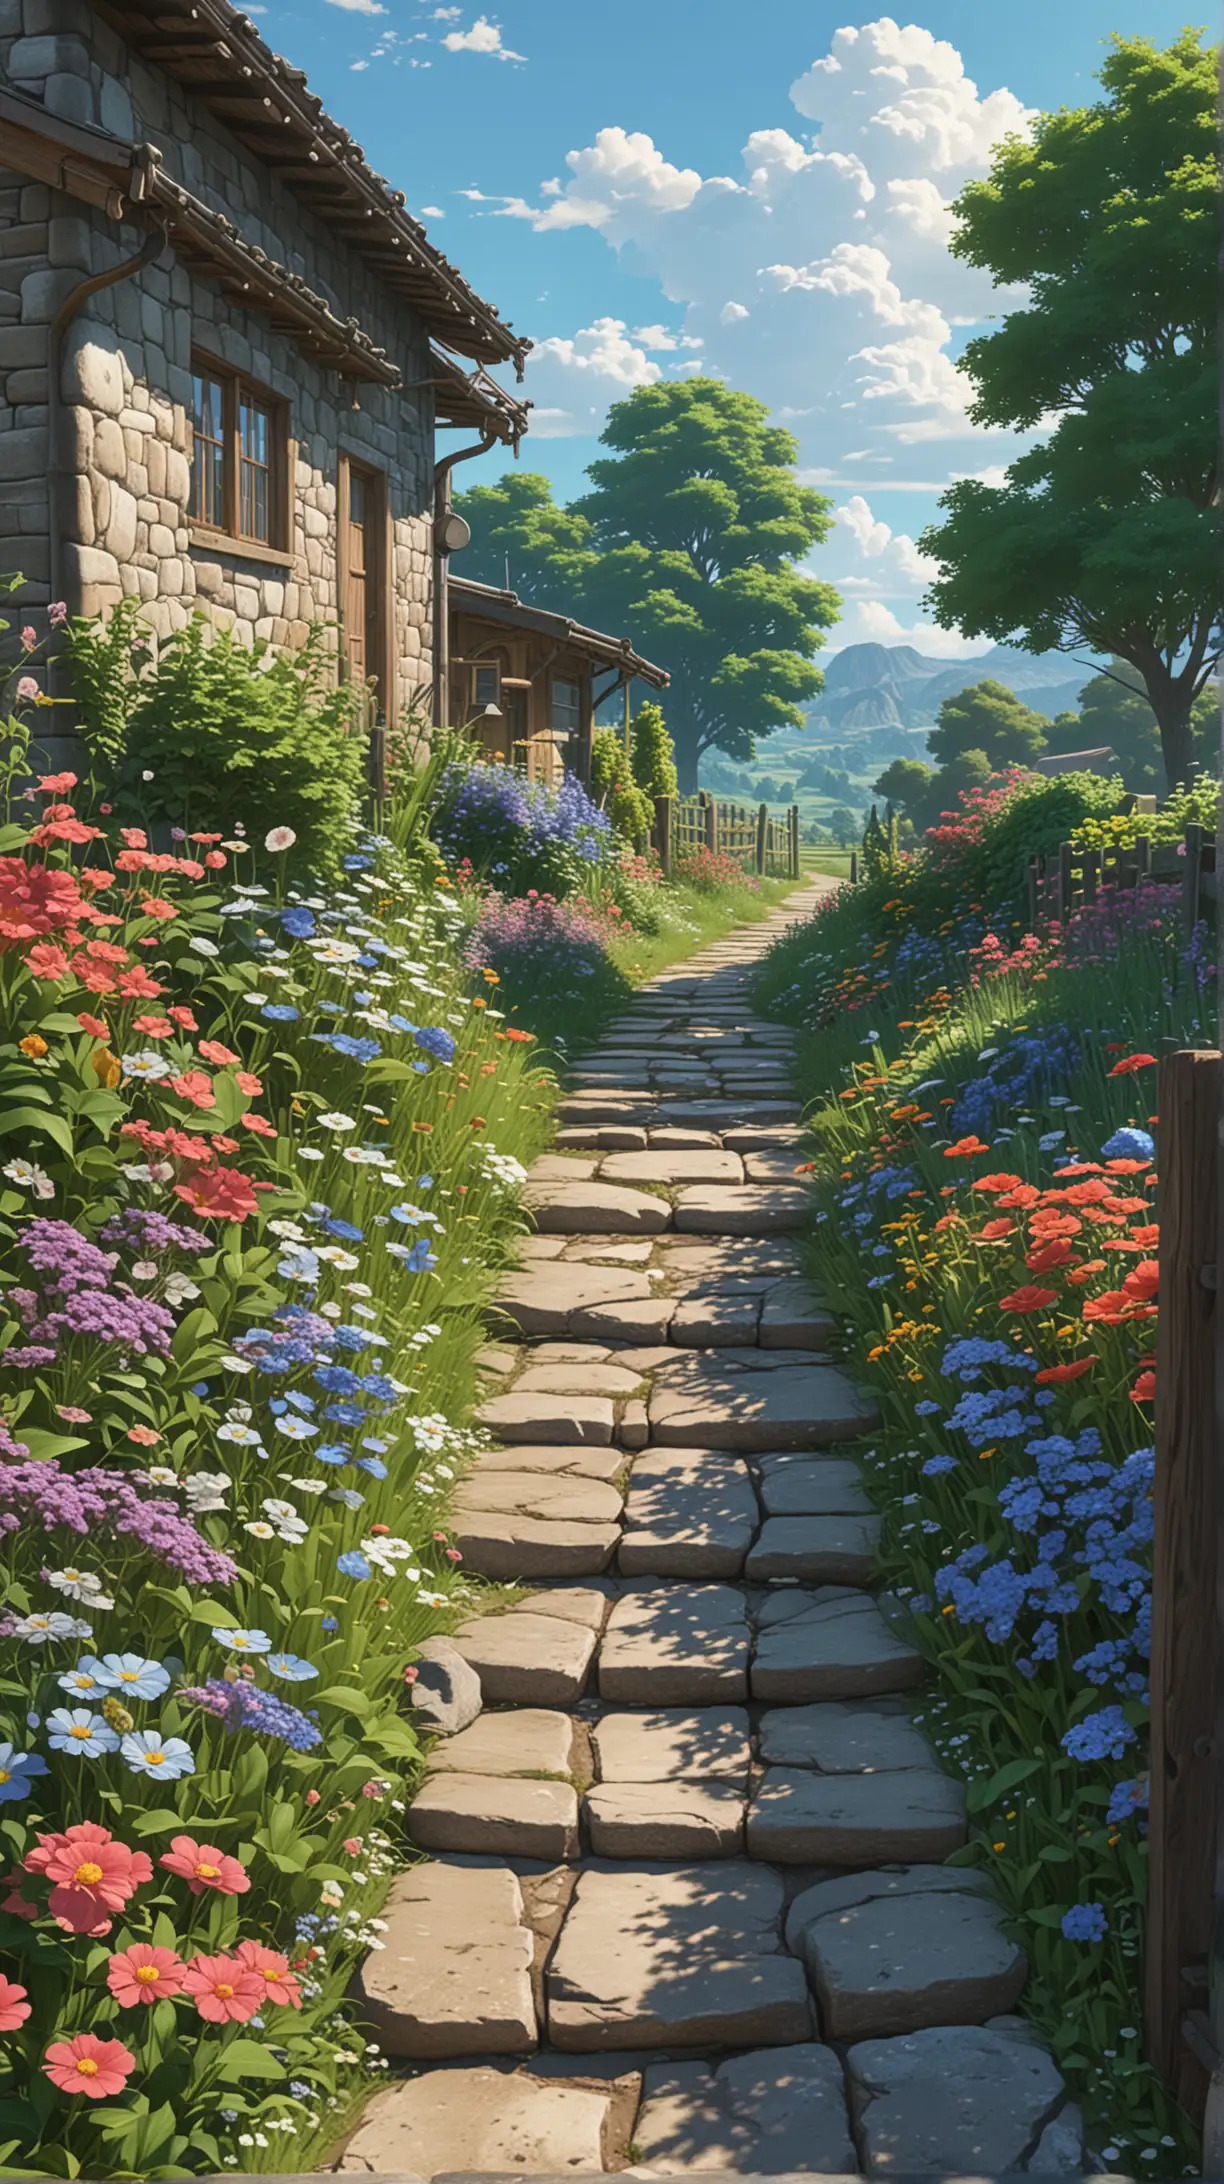 Rustic Farmhouse Path with Vibrant Flowers and Morning Sky